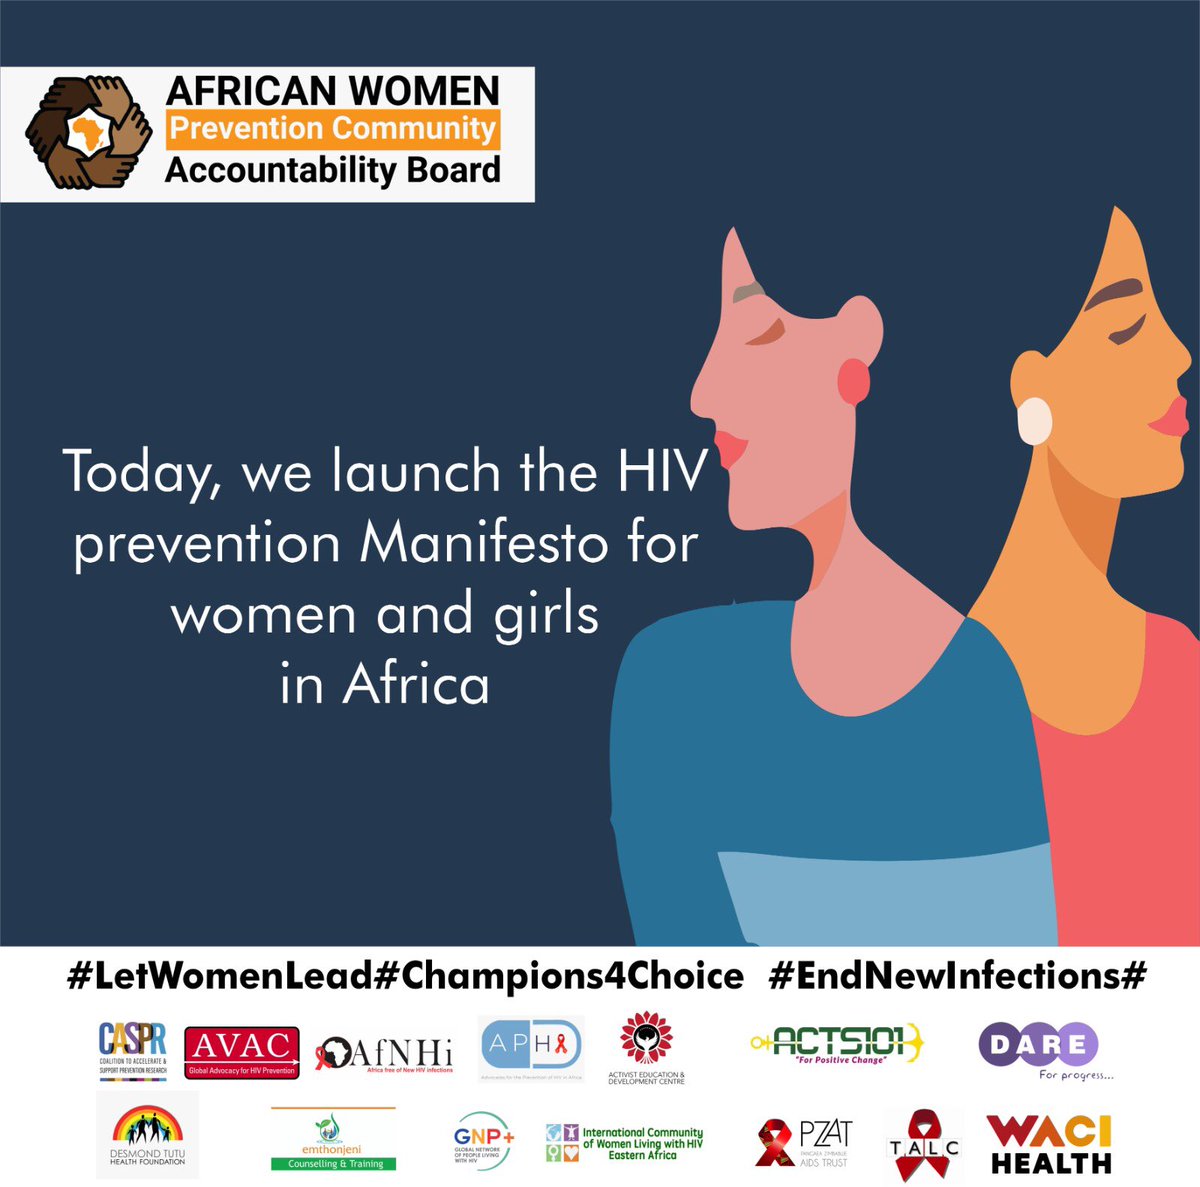 Today we are thrilled to join the historic HIV Prevention CHOICE Manifesto event in Kampala,Uganda. #ChoiceManifesto #EndNewInfections #Champions4Choice #dareforprogress #U4Ptanzania #StayPrEPared #StayEngaged #FacilitateChoice #COMPASSAfrica #LetWomenLead 
@Winnie_Byanyima